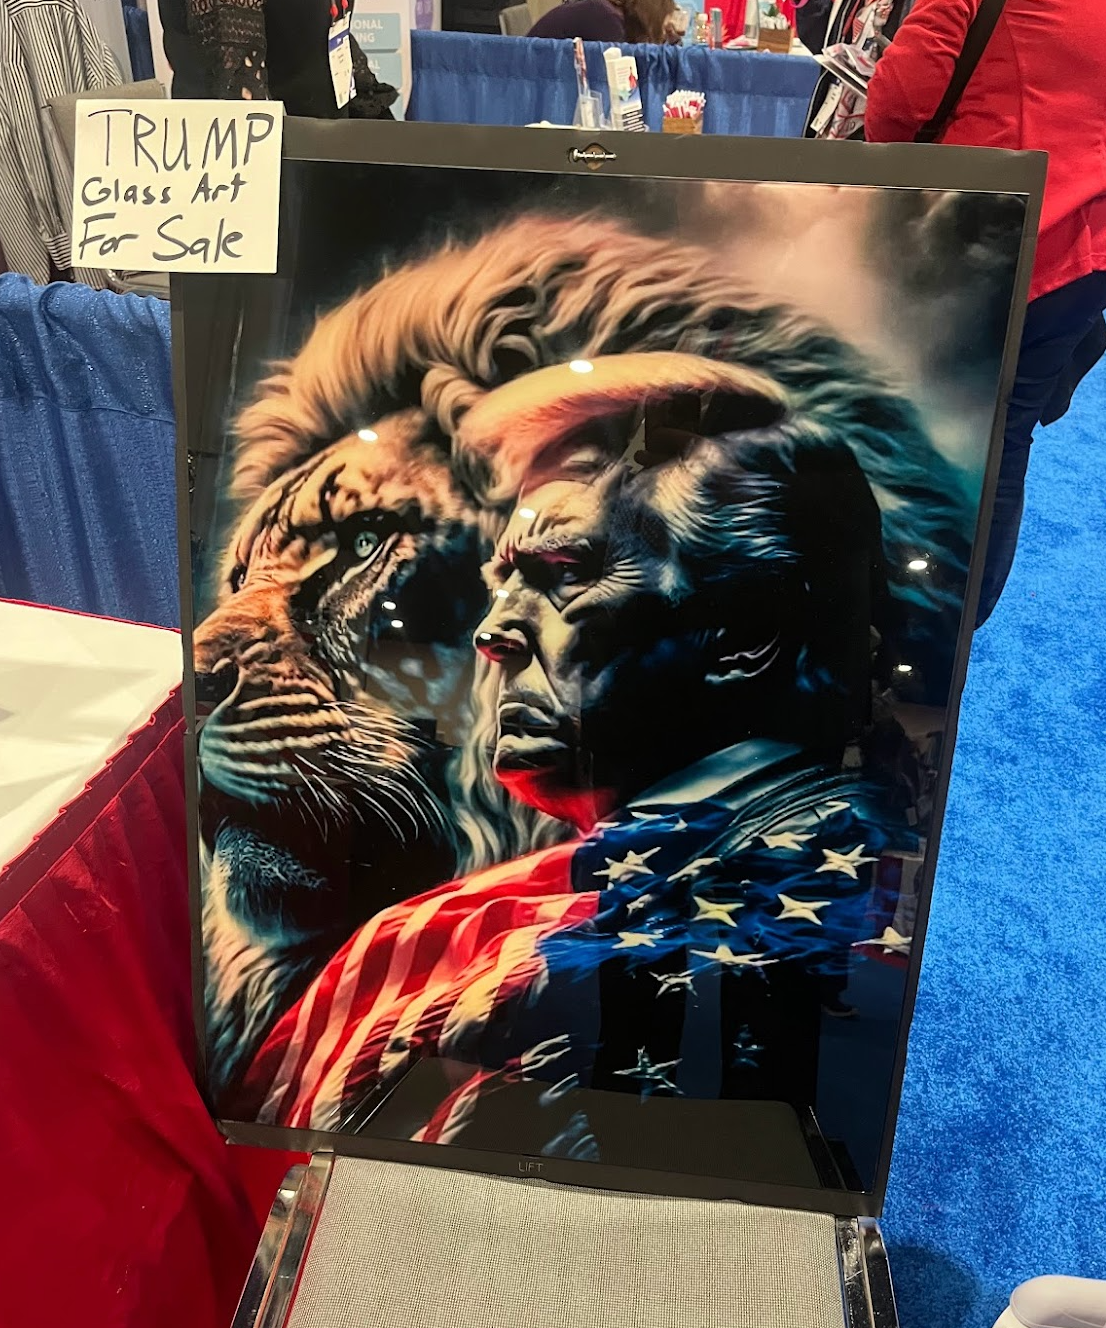 Donald Trump looks ahead next to a lion in a painting being sold at CPAC